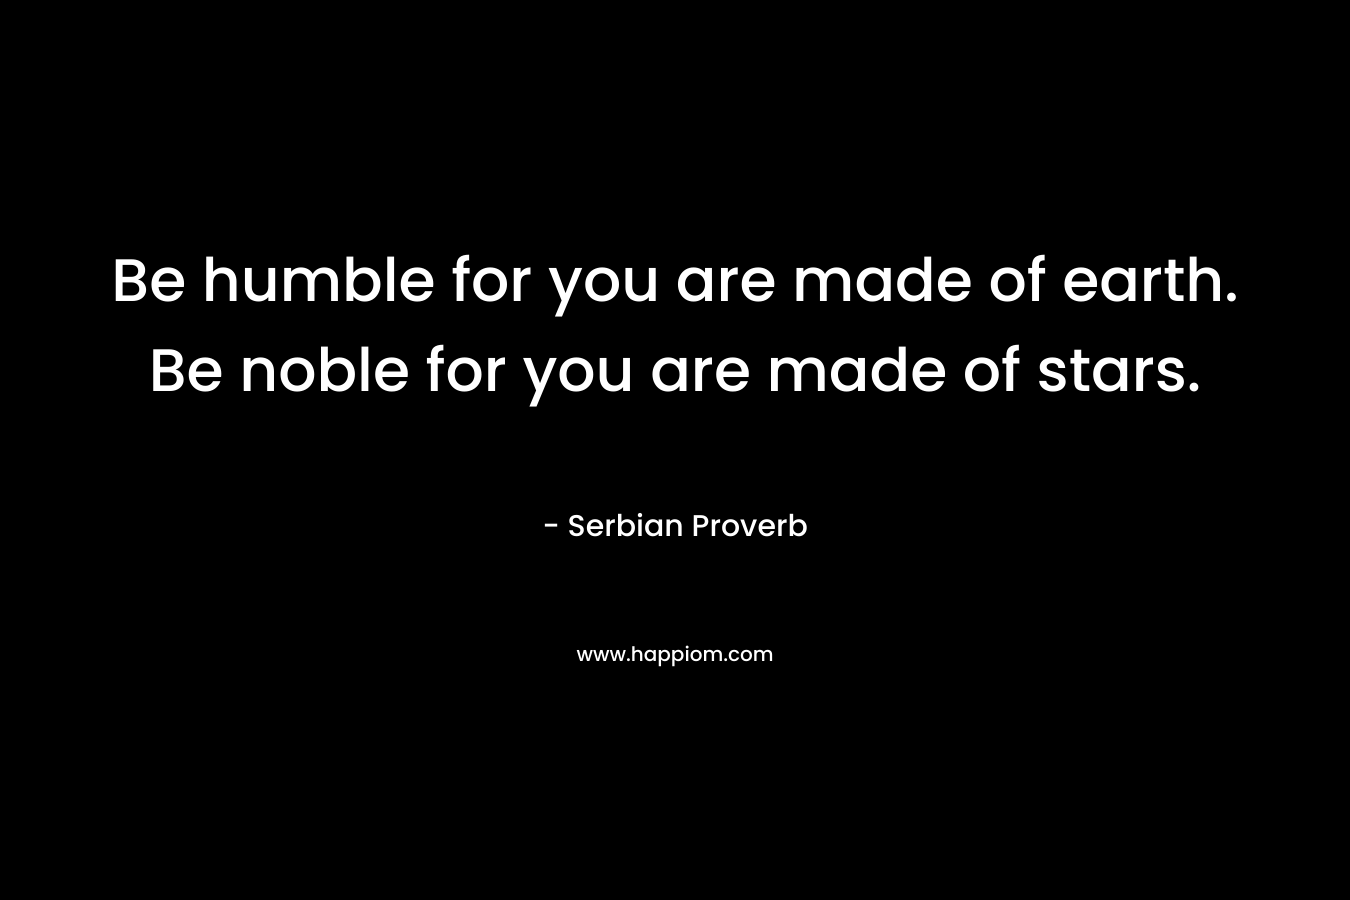 Be humble for you are made of earth. Be noble for you are made of stars. – Serbian Proverb